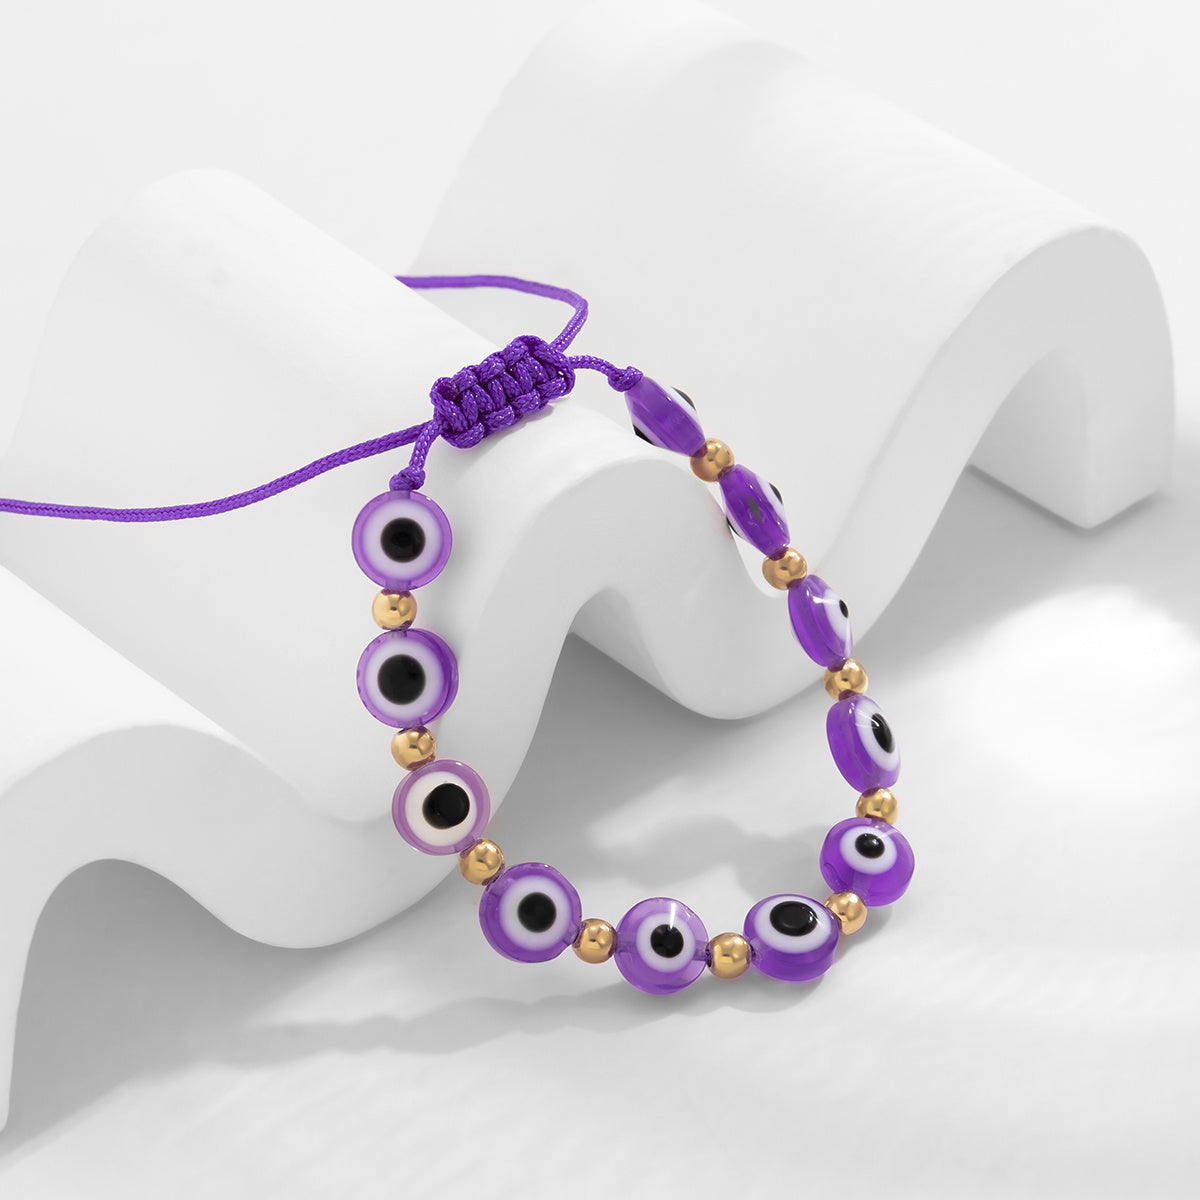 2023 New In: Colorful Devil's Eye Adjustable Hand Braided Bracelet - A Unique Women's Jewelry Piece!